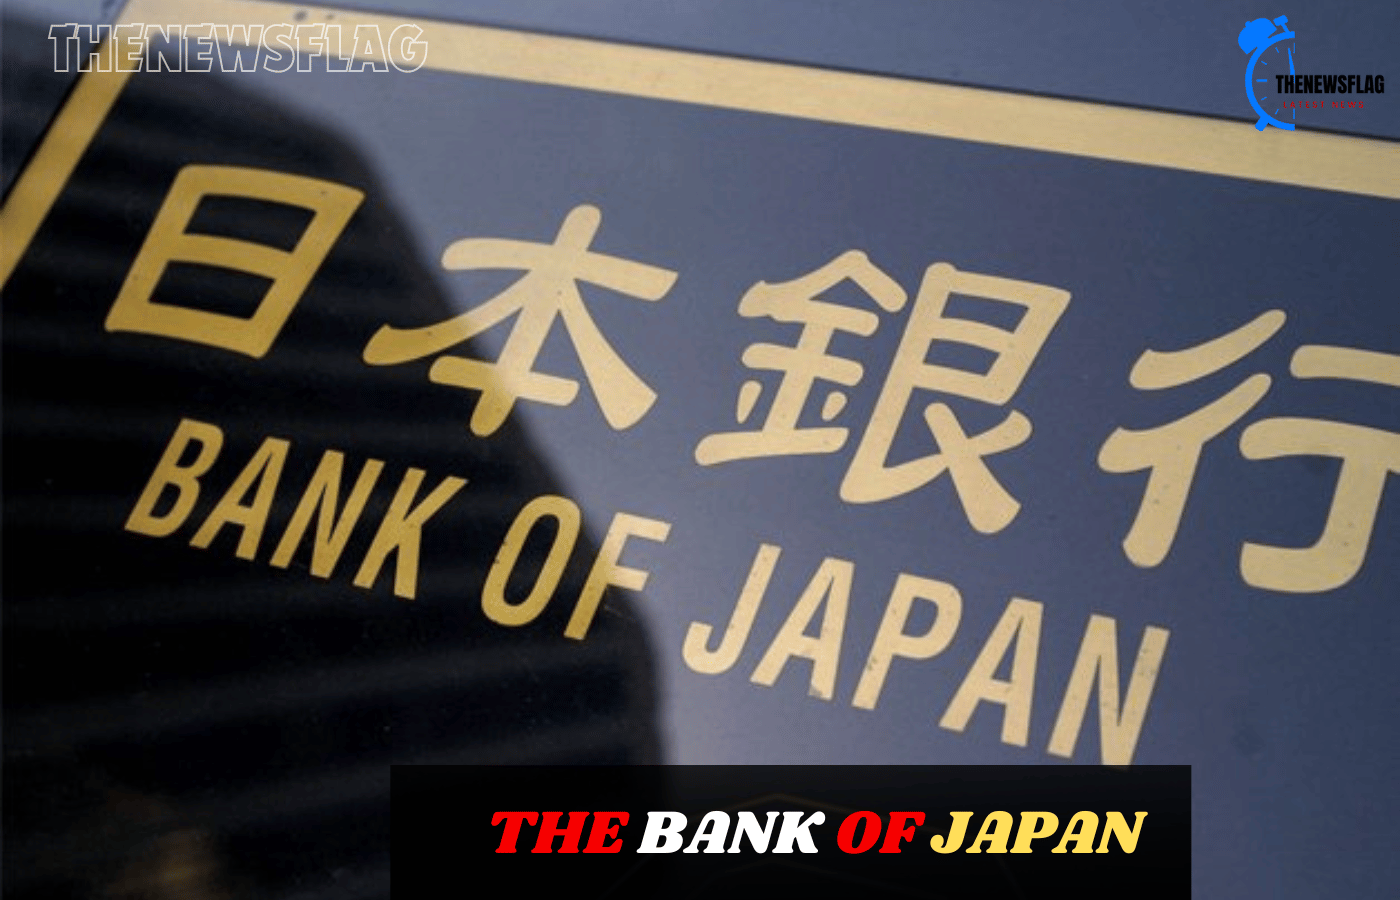 FOR THE FIRST TIME IN 17 YEARS, THE BANK OF JAPAN RAISES INTEREST RATE; THE NEGATIVE INTEREST RATE POLICY ENDS